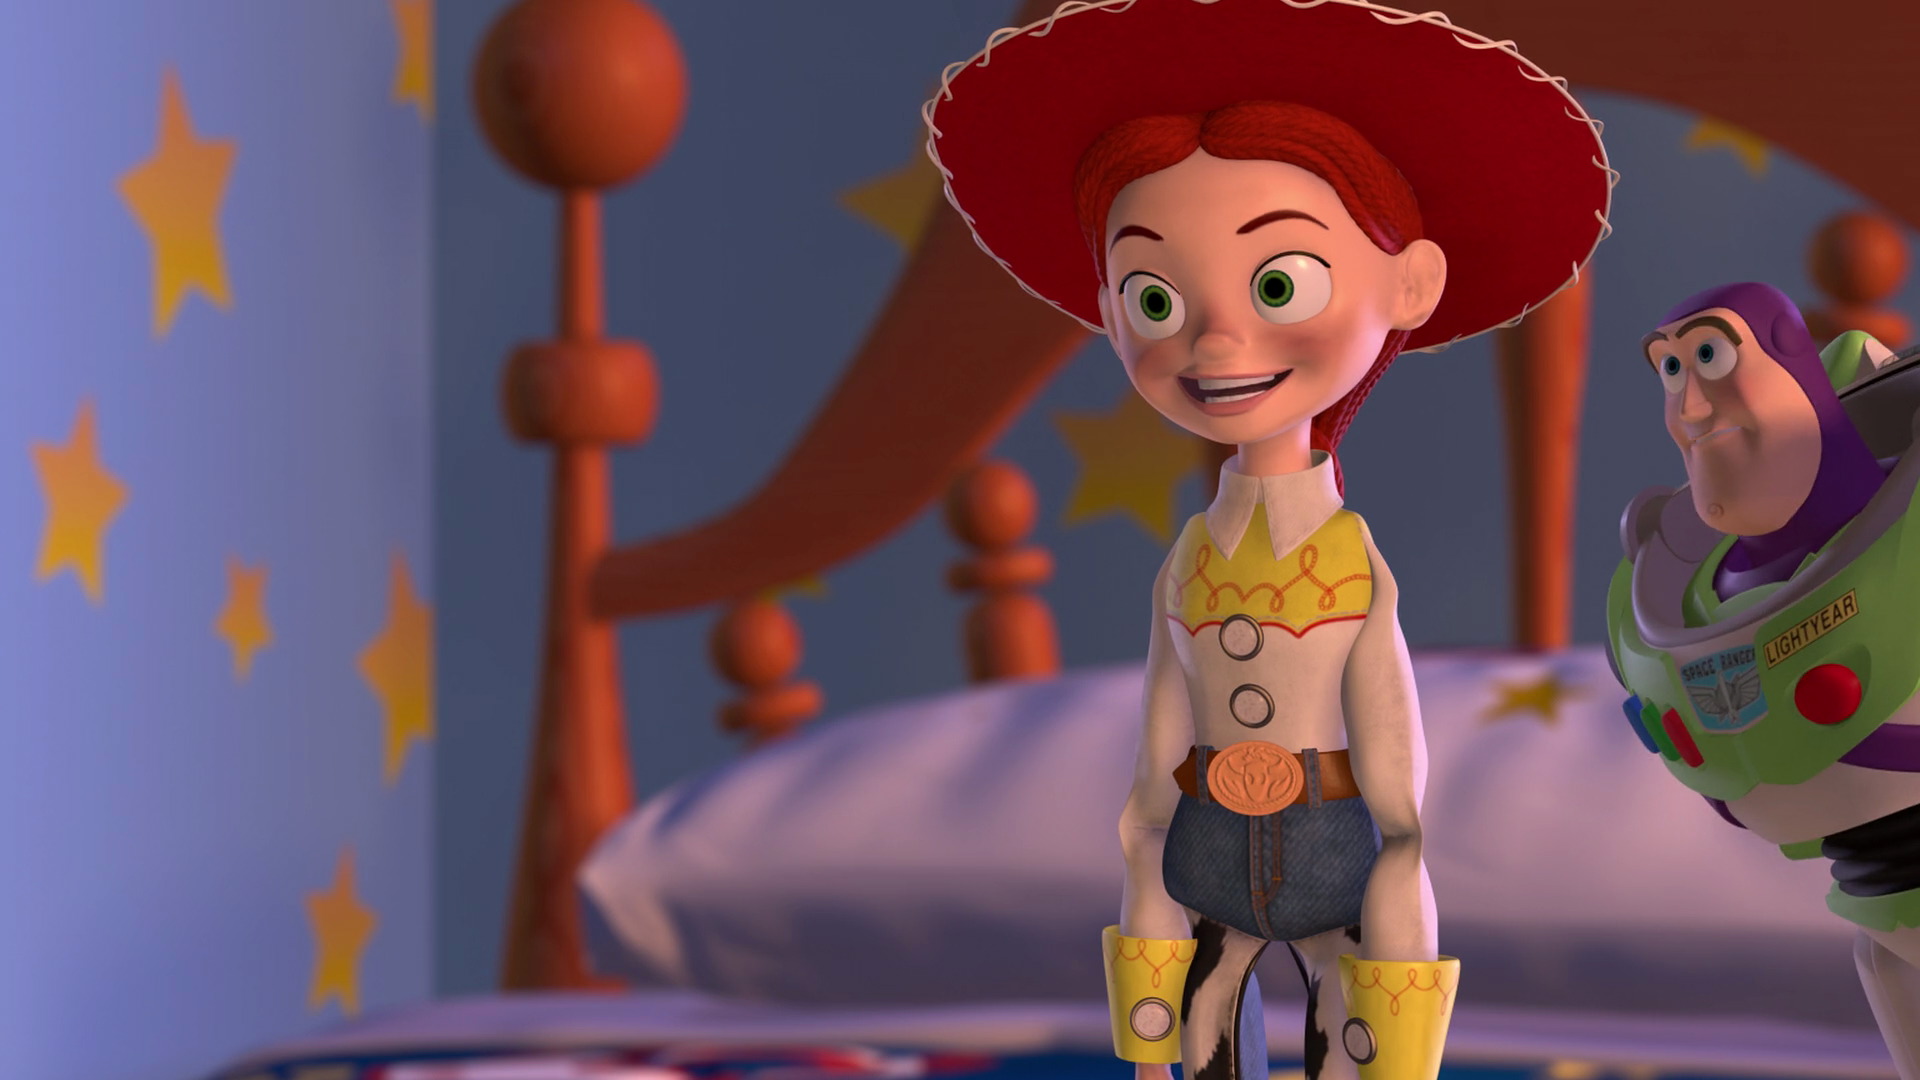 Jessie Personnage Toy Story 2 08 